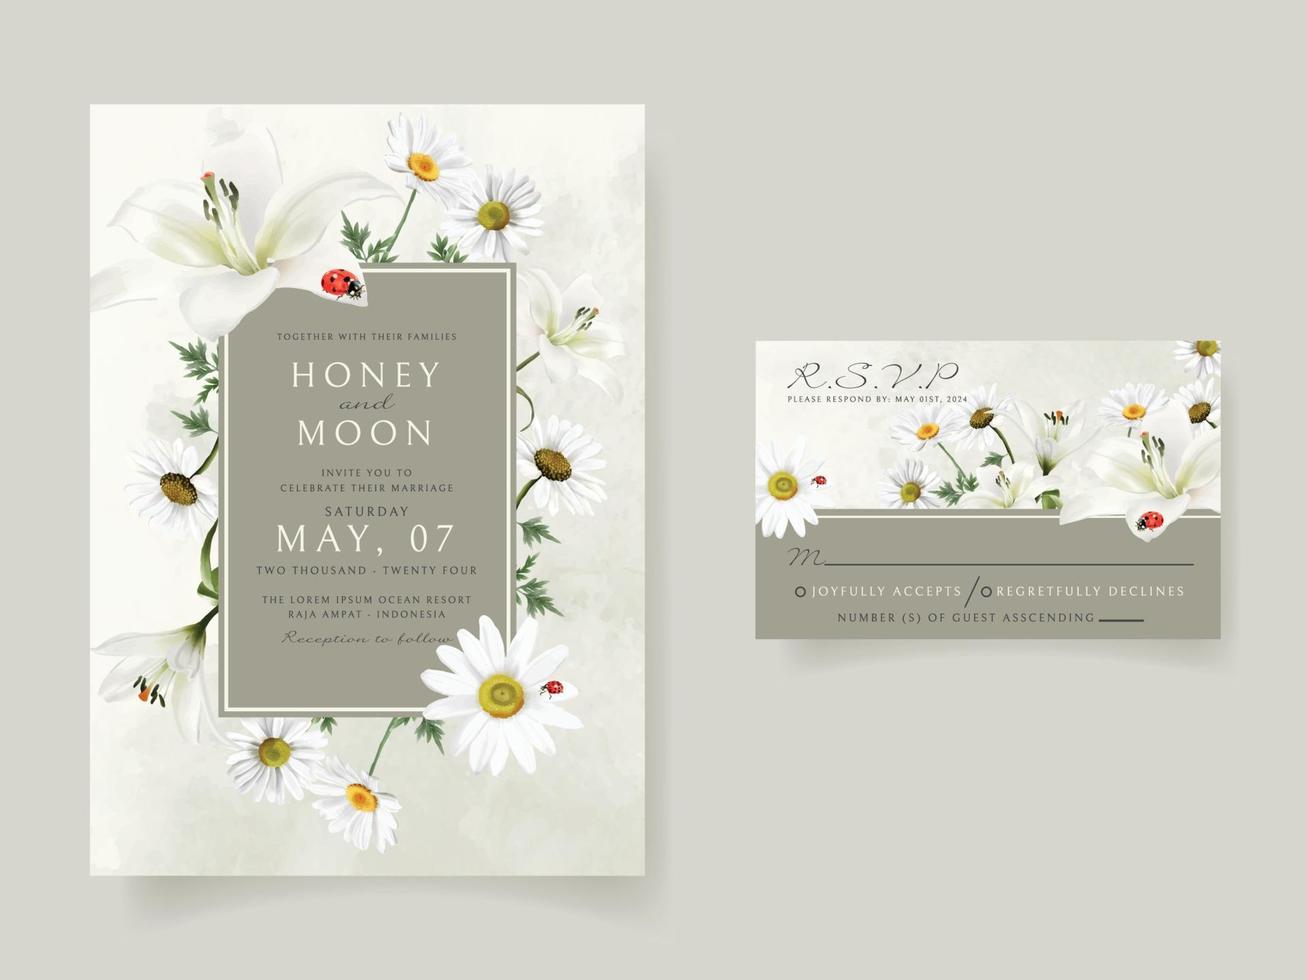 Beautiful floral and ladybugs wedding invitation card vector